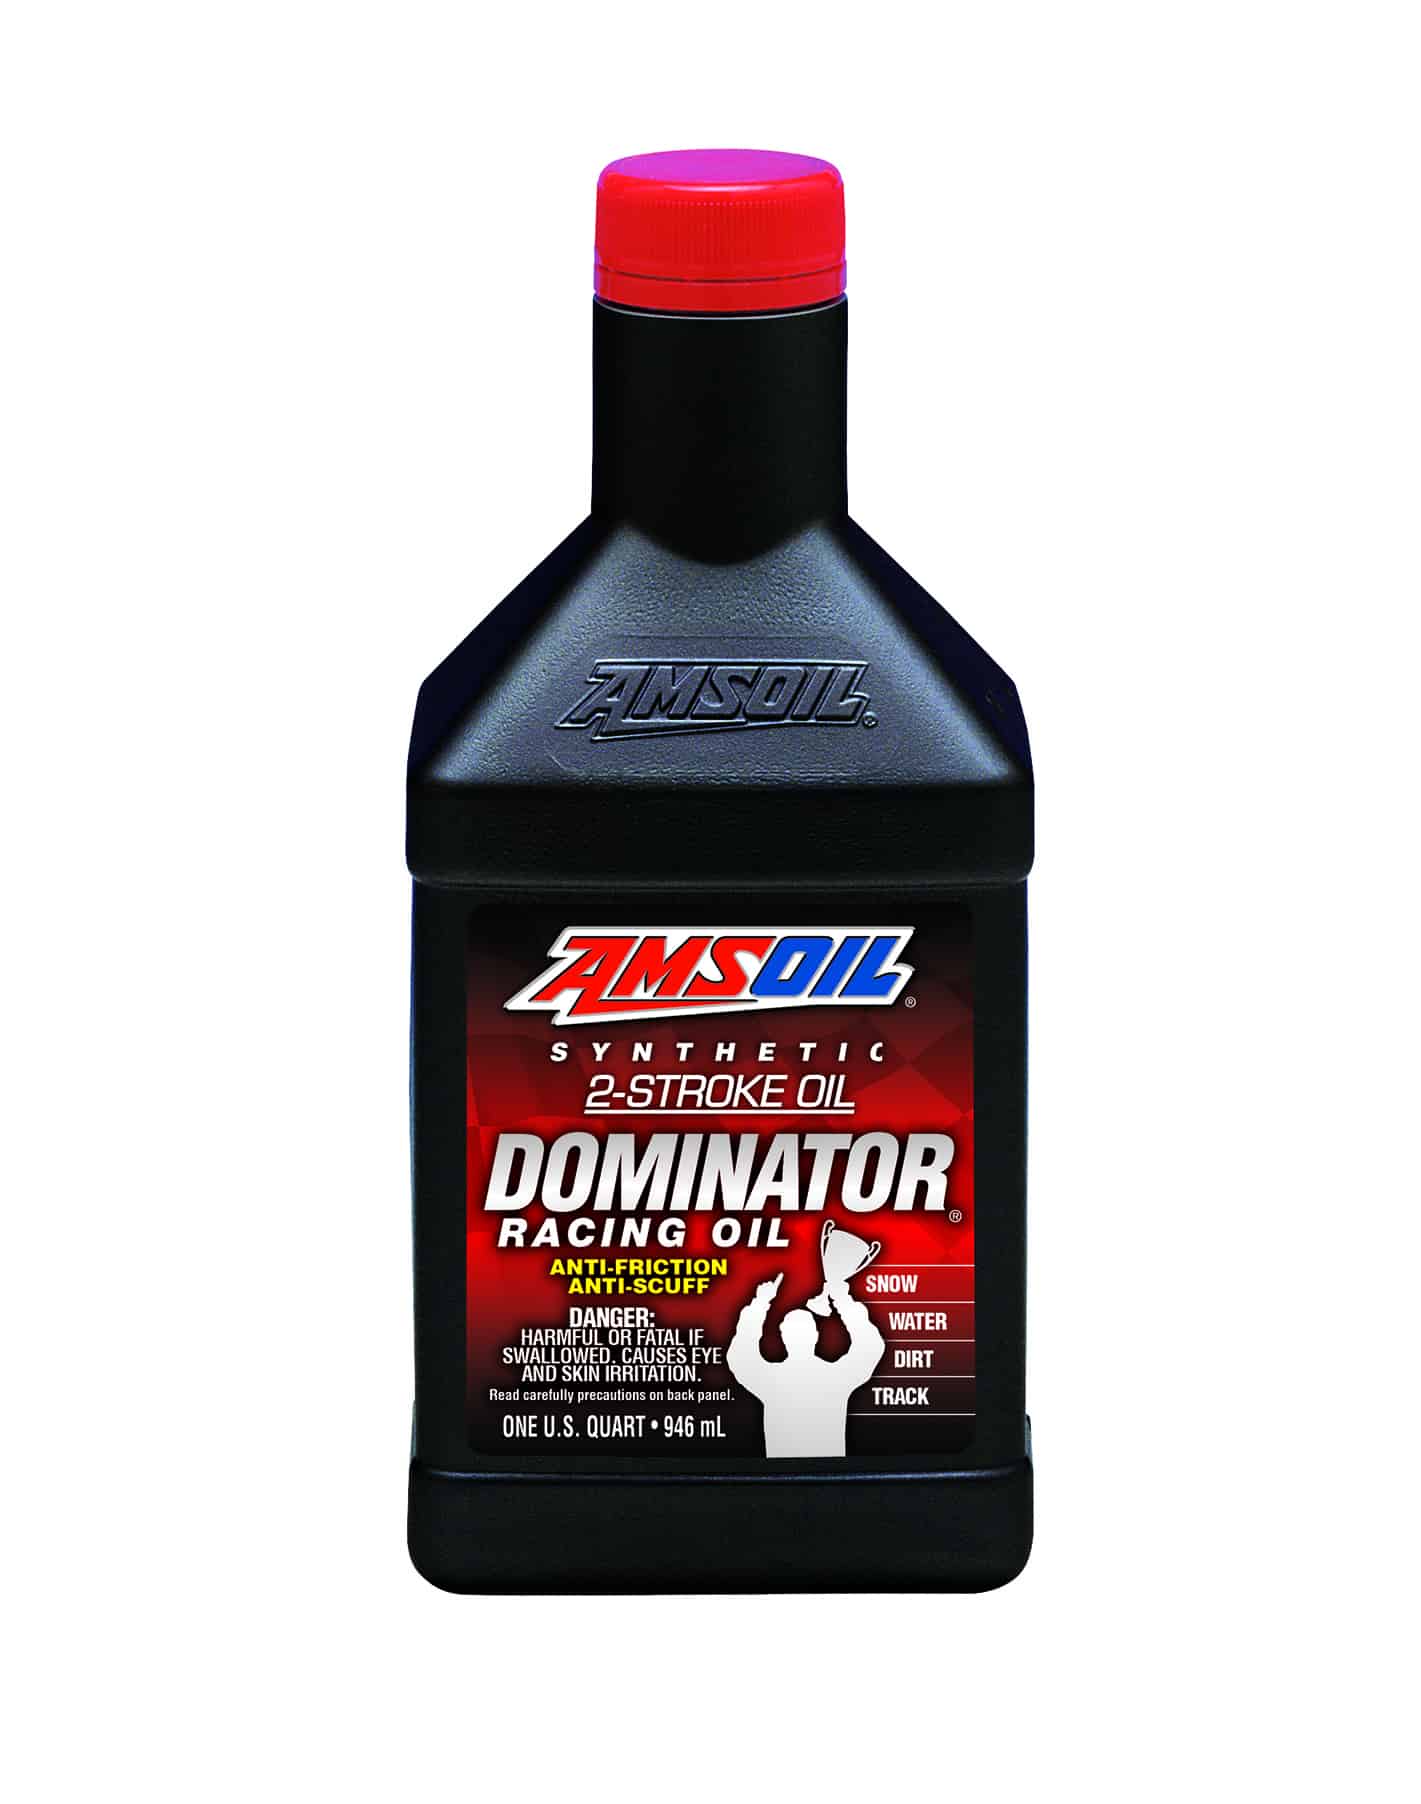 A bottle of AMSOIL DOMINATOR® 2-Stroke Racing Oil, formulated to address the heat, pressure and friction of race-engineered engines.